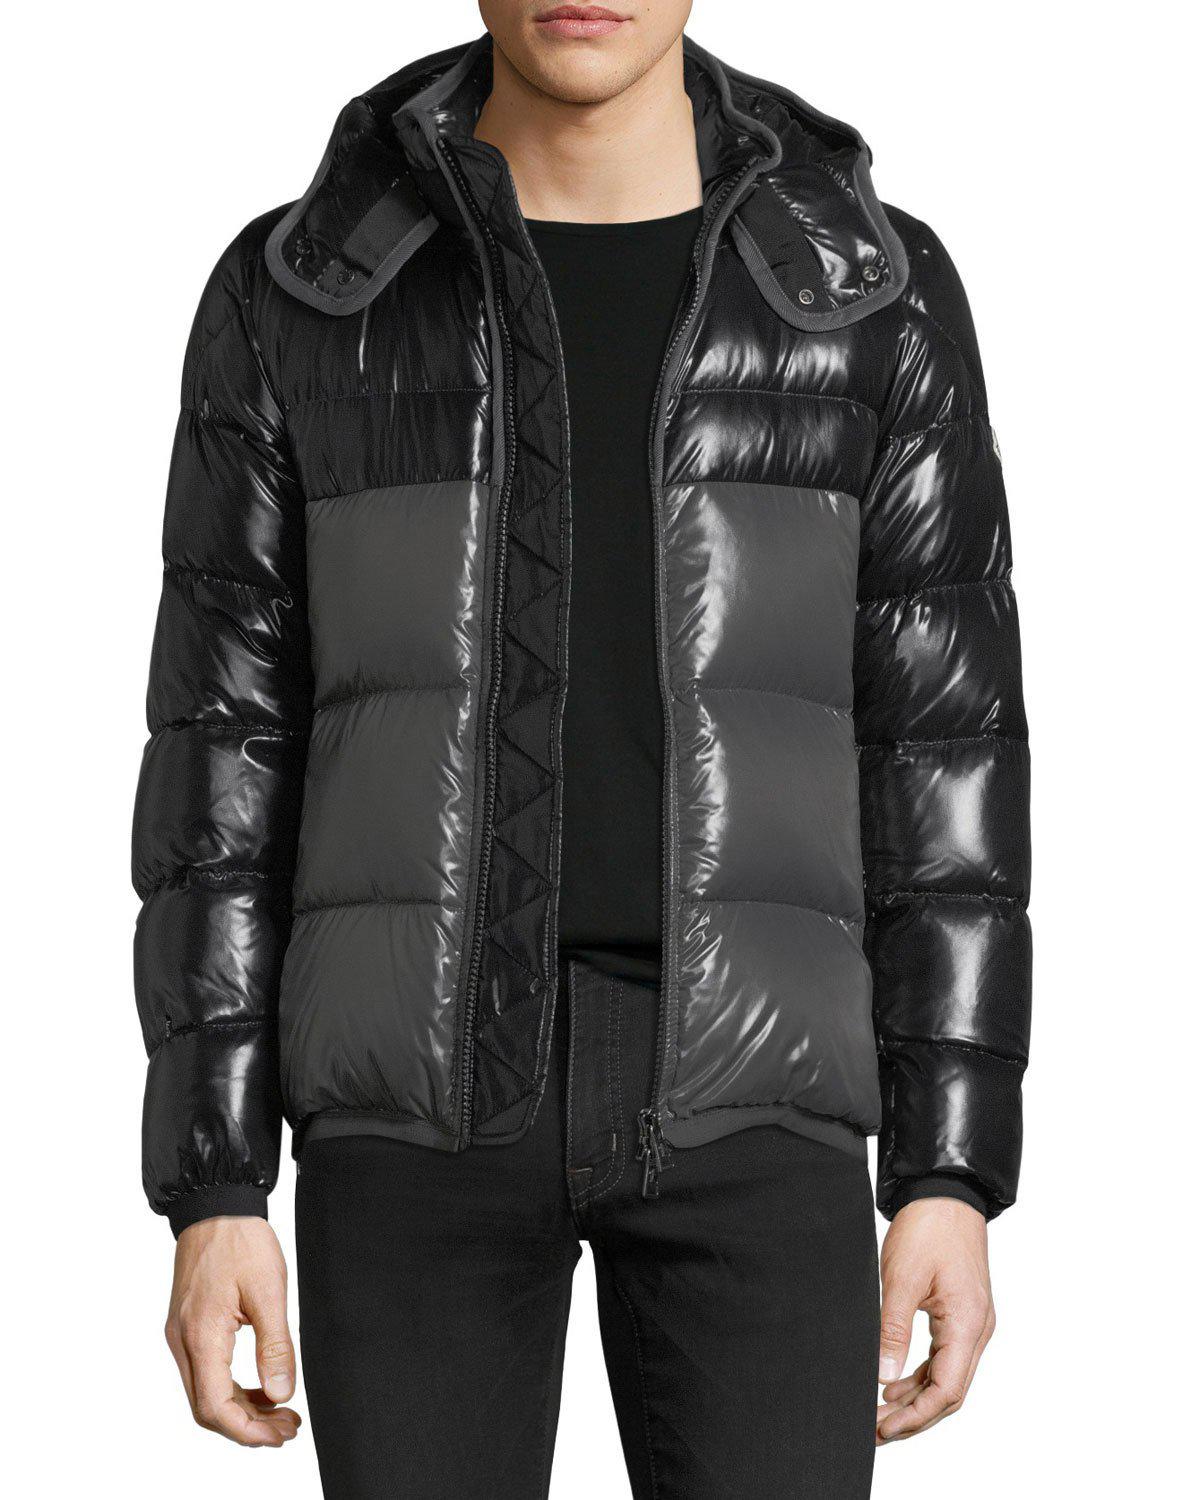 Moncler Harry Shiny Puffer Jacket W/ Removable Hood in Black for Men - Lyst